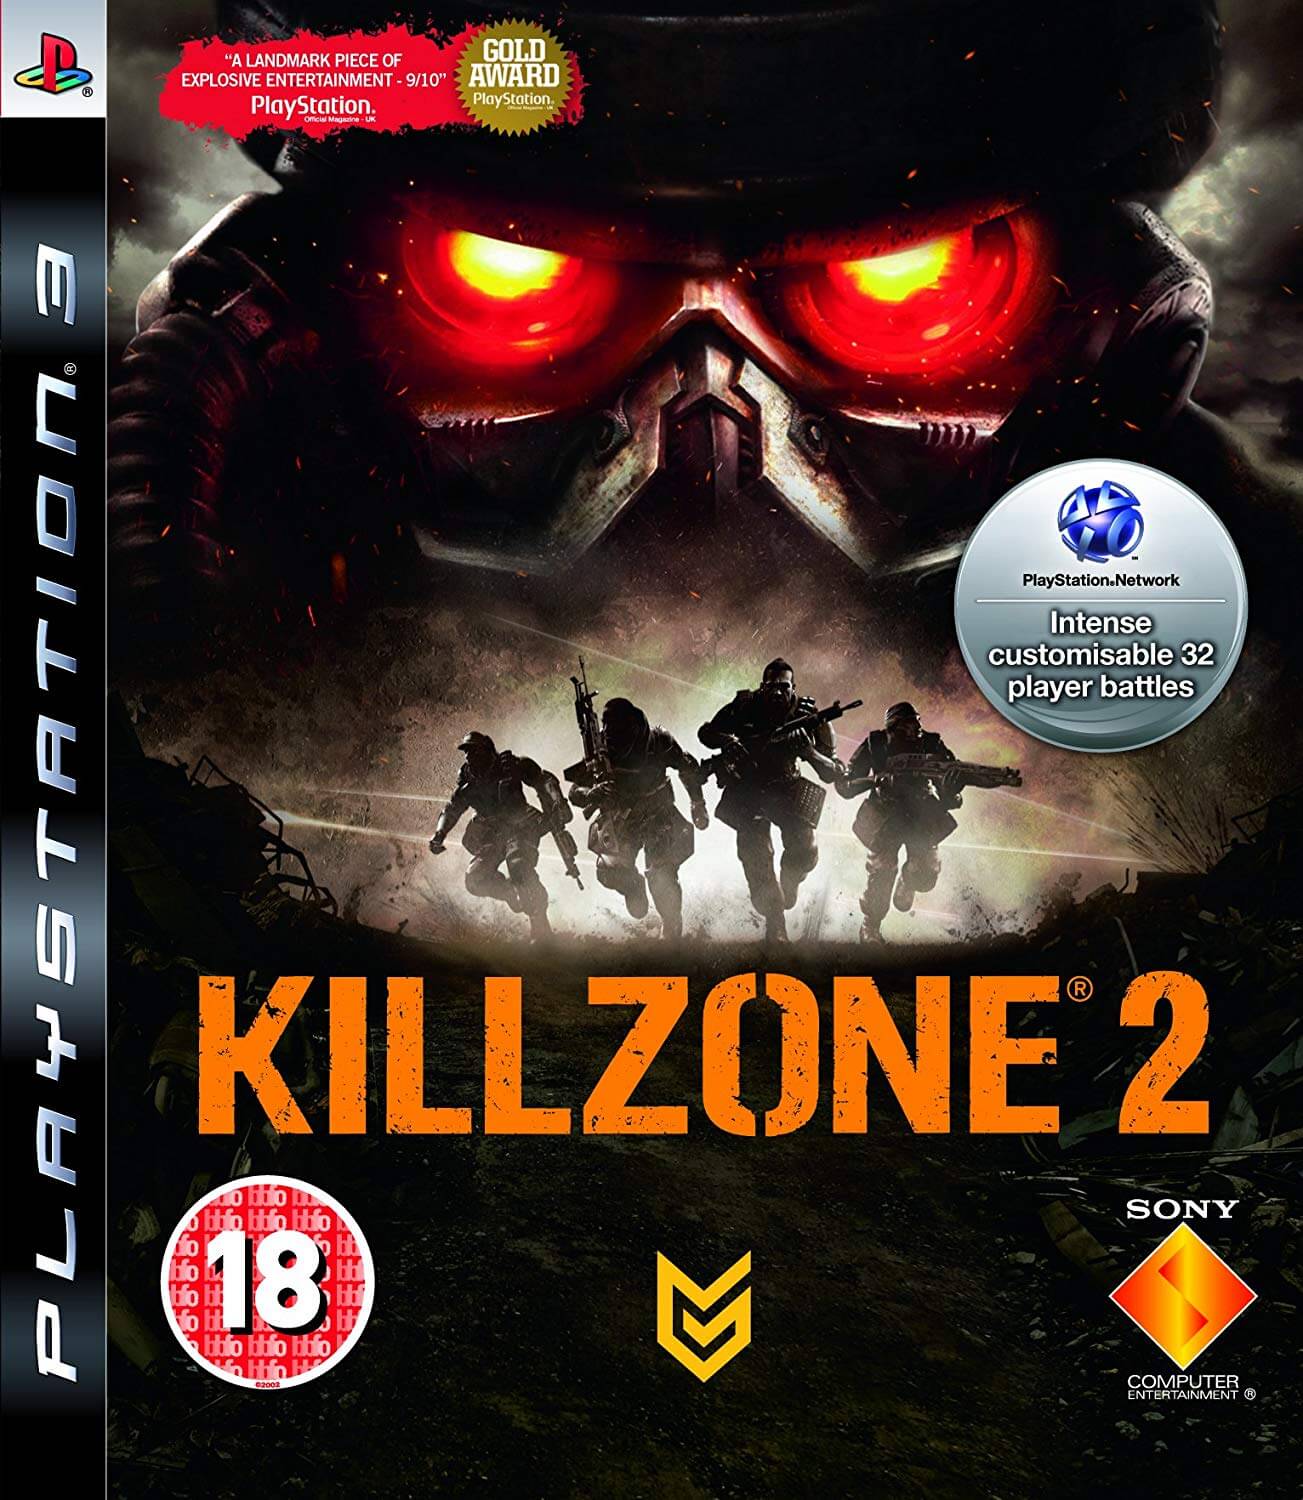 Killzone 2 - PS3 ROM & ISO - Playstation 3 Game Download